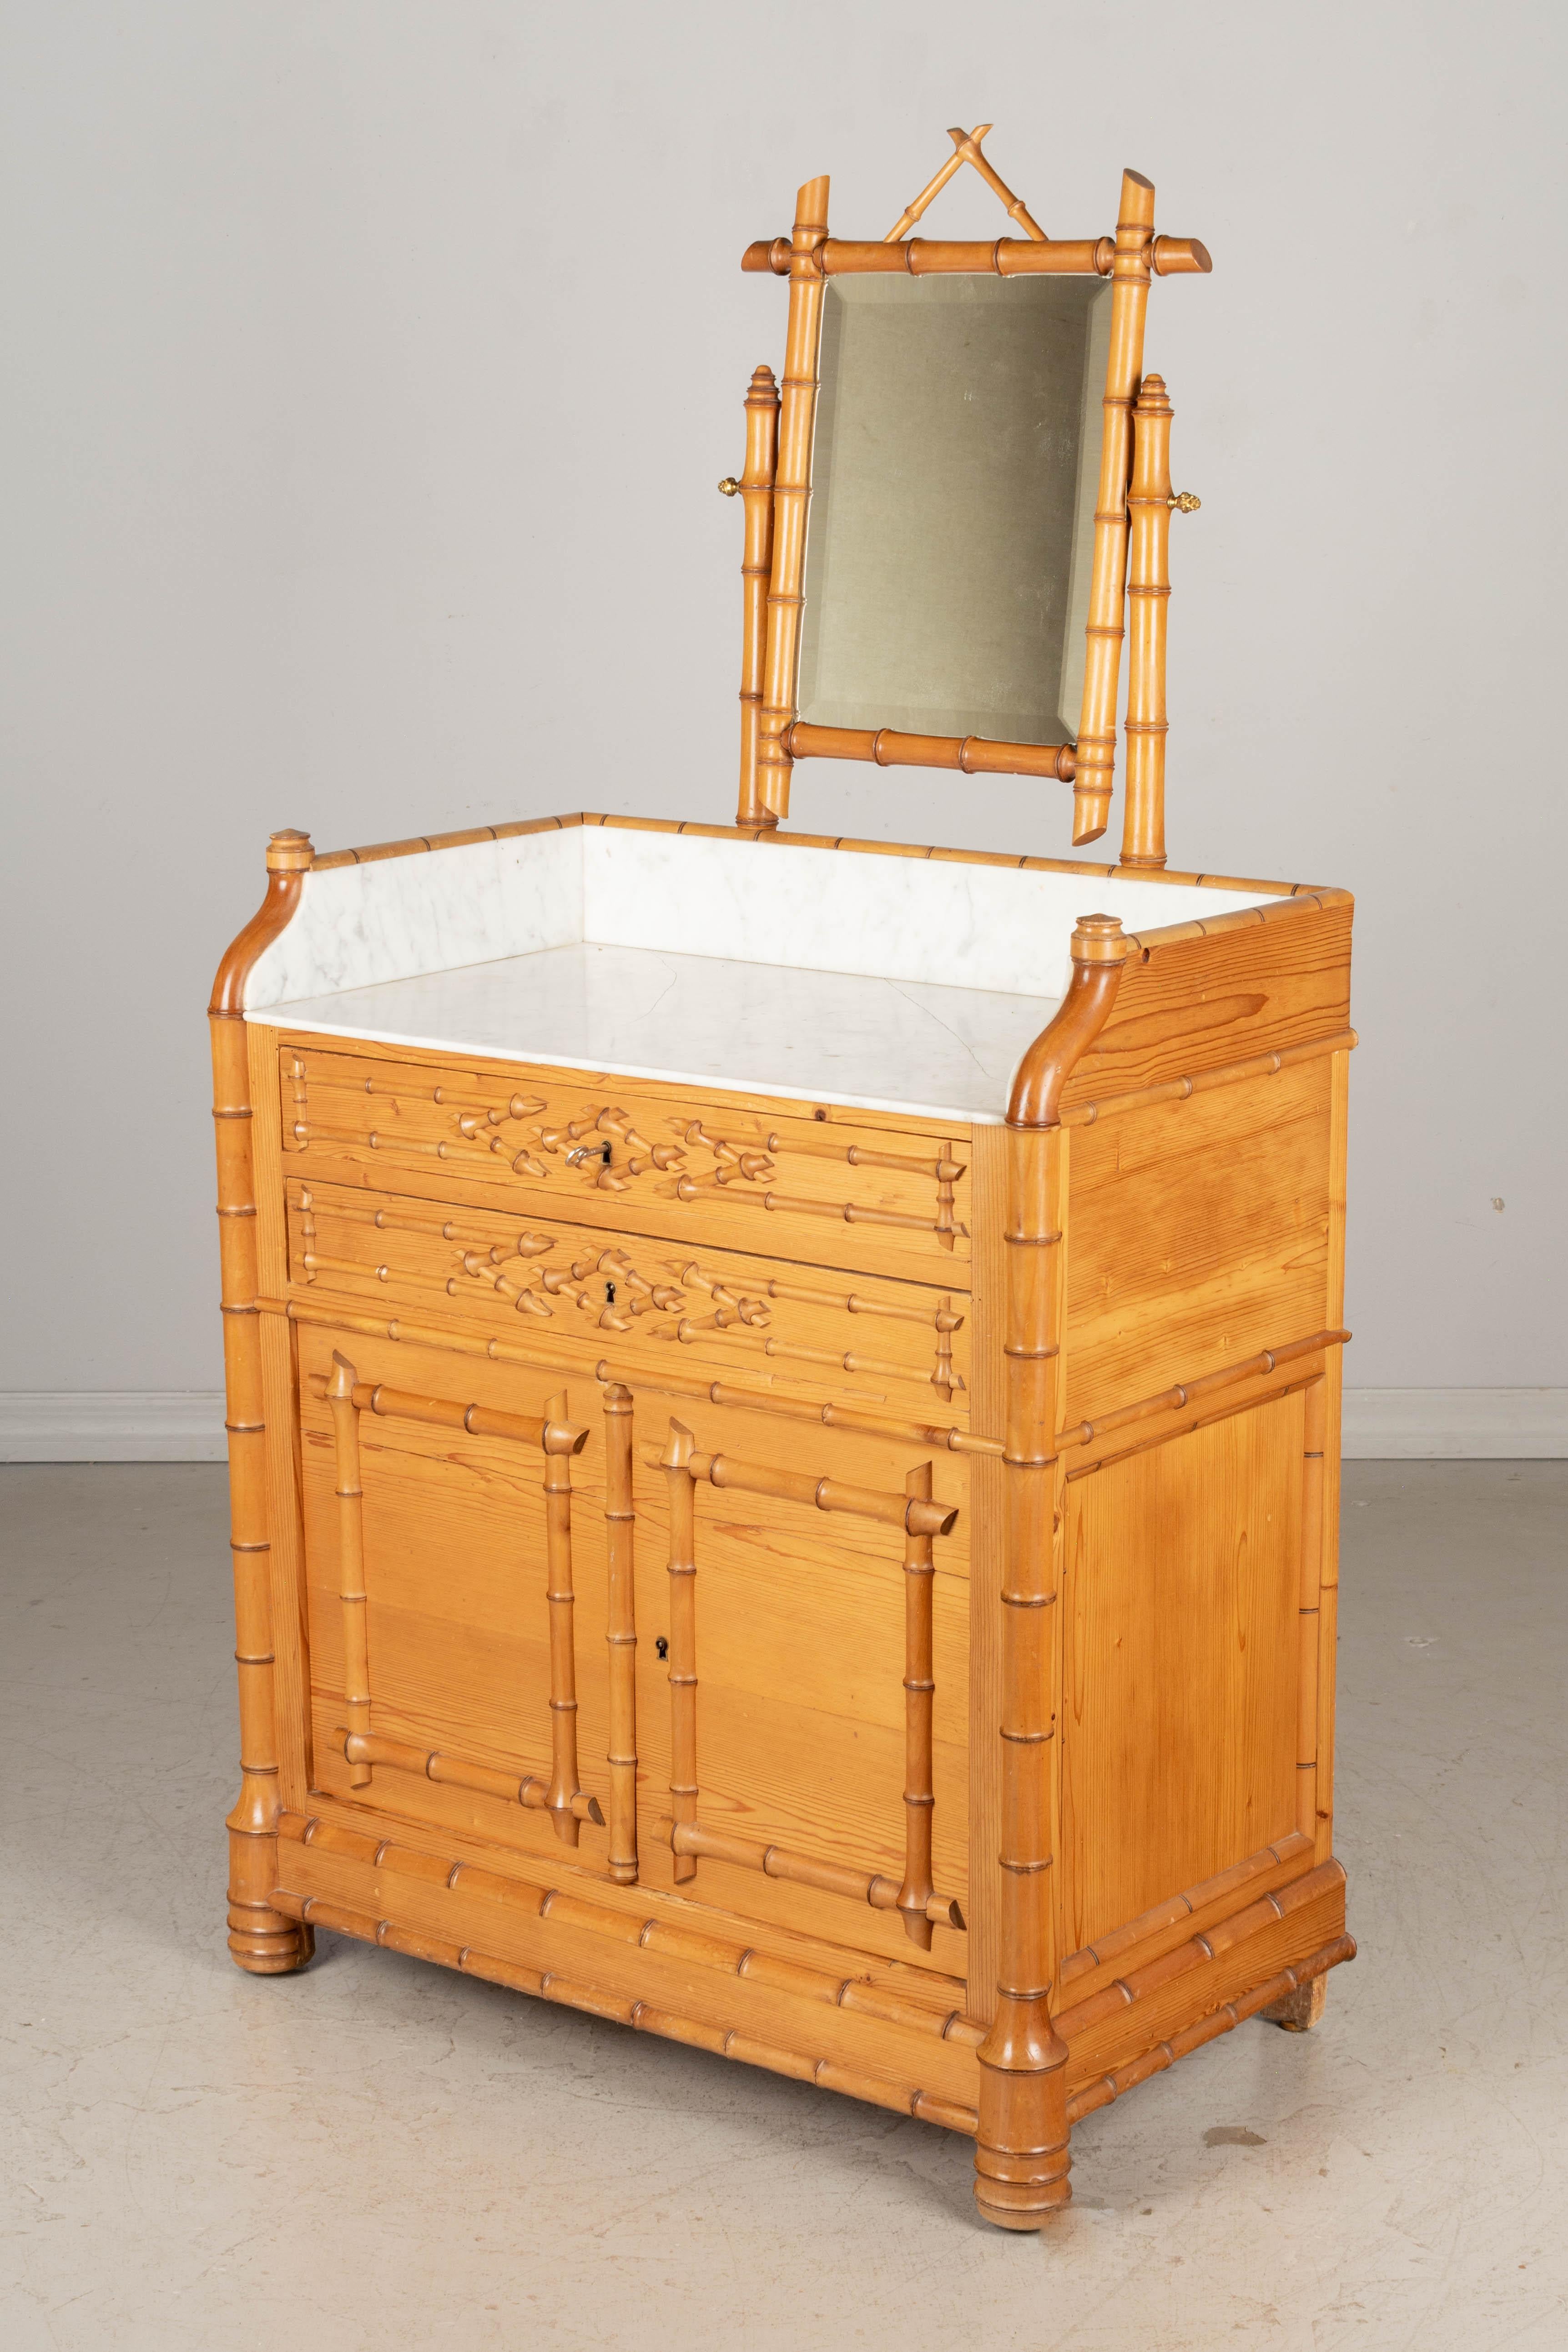 An early 20th century French faux bamboo marble top dresser or wash stand with pivoting vanity mirror. Made of cherry wood with two dovetailed drawers and a cabinet below, each with working locks and one key. White marble top (16.5